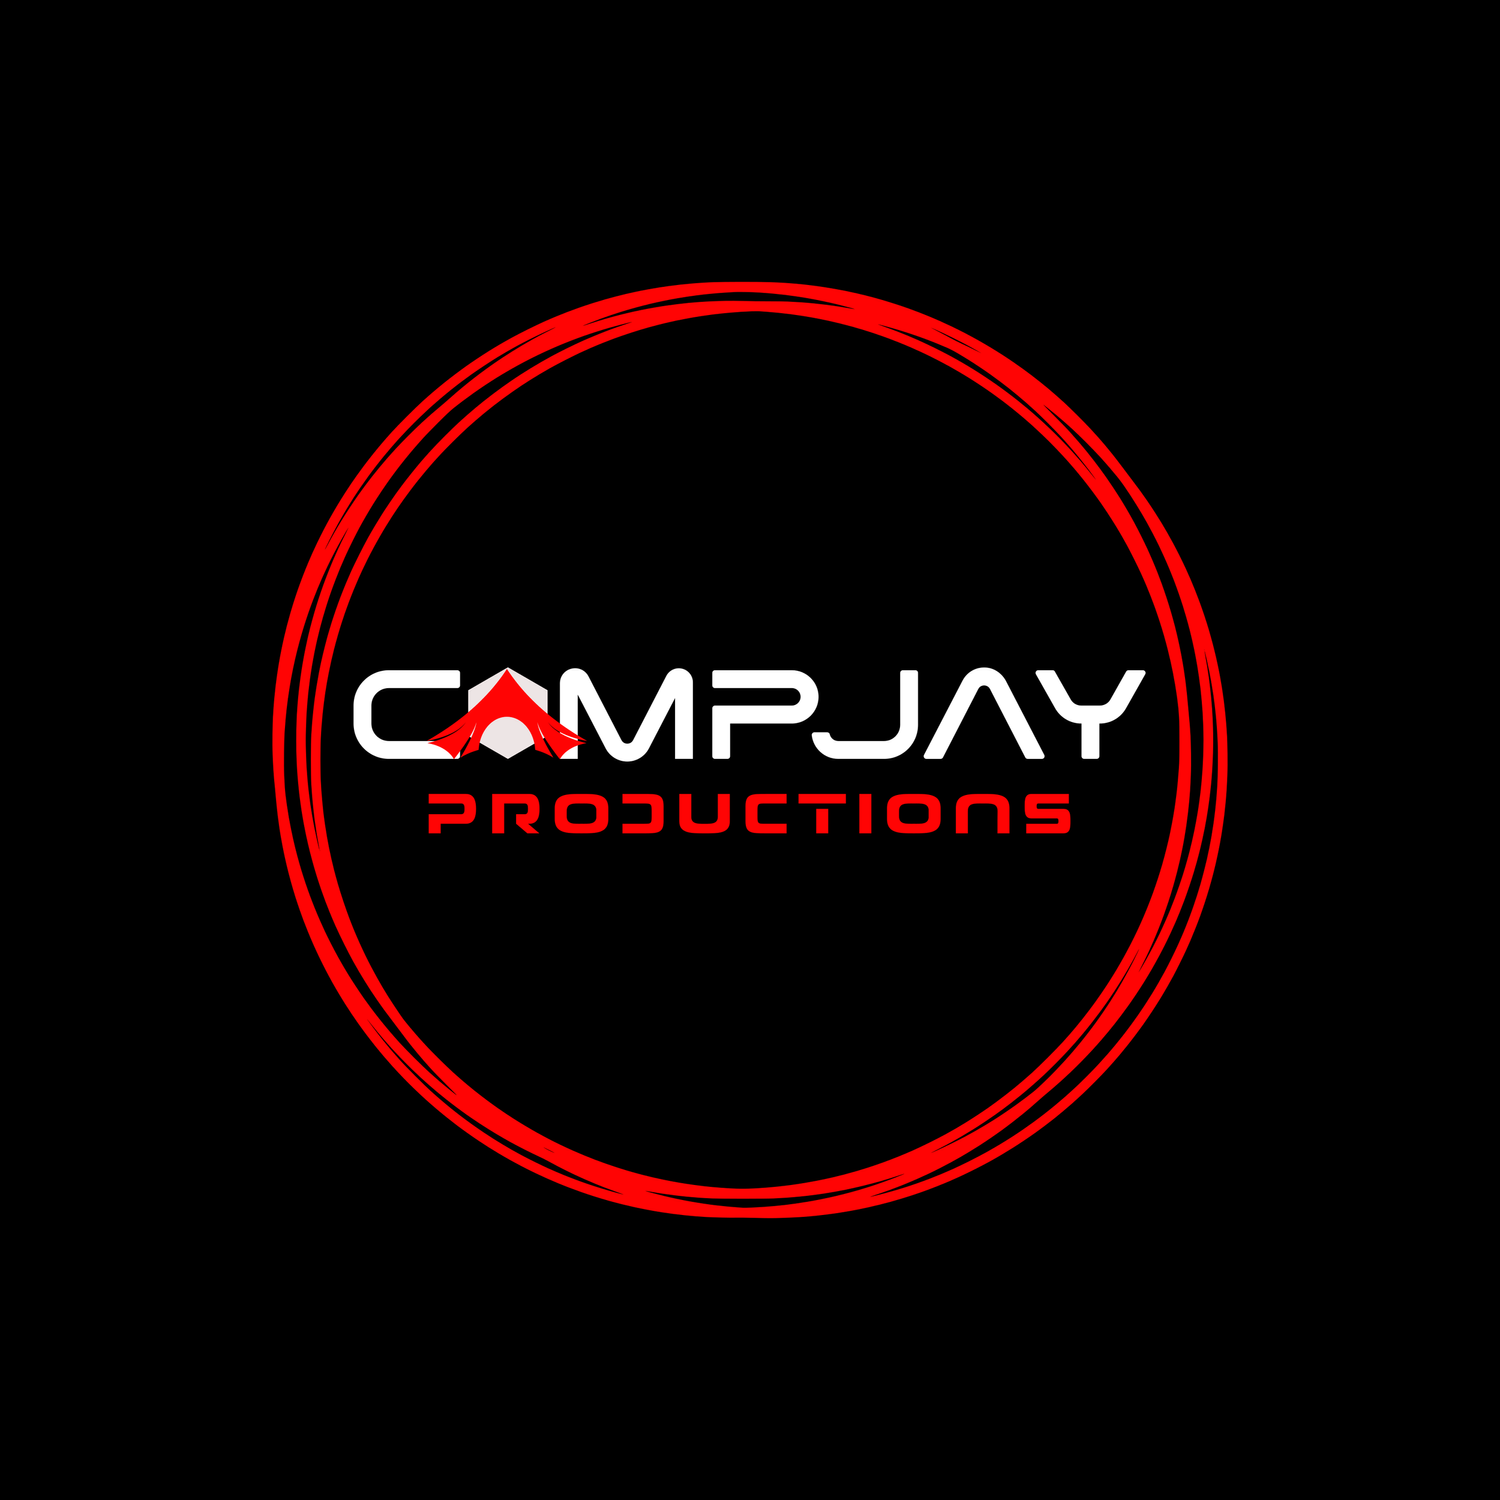 Camp Jay Productions